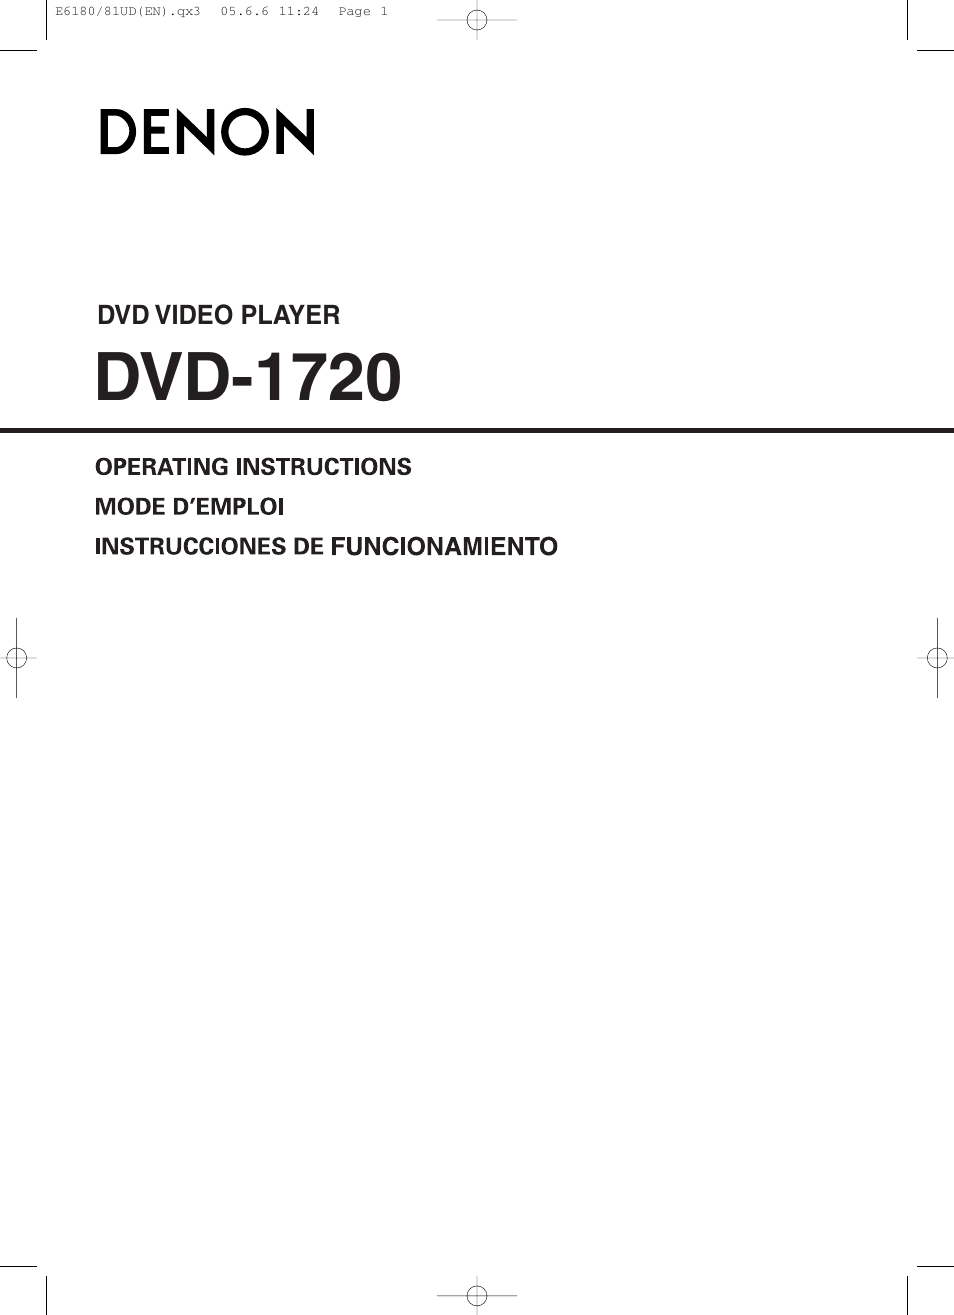 Denon DVD-1720 User Manual | 54 pages